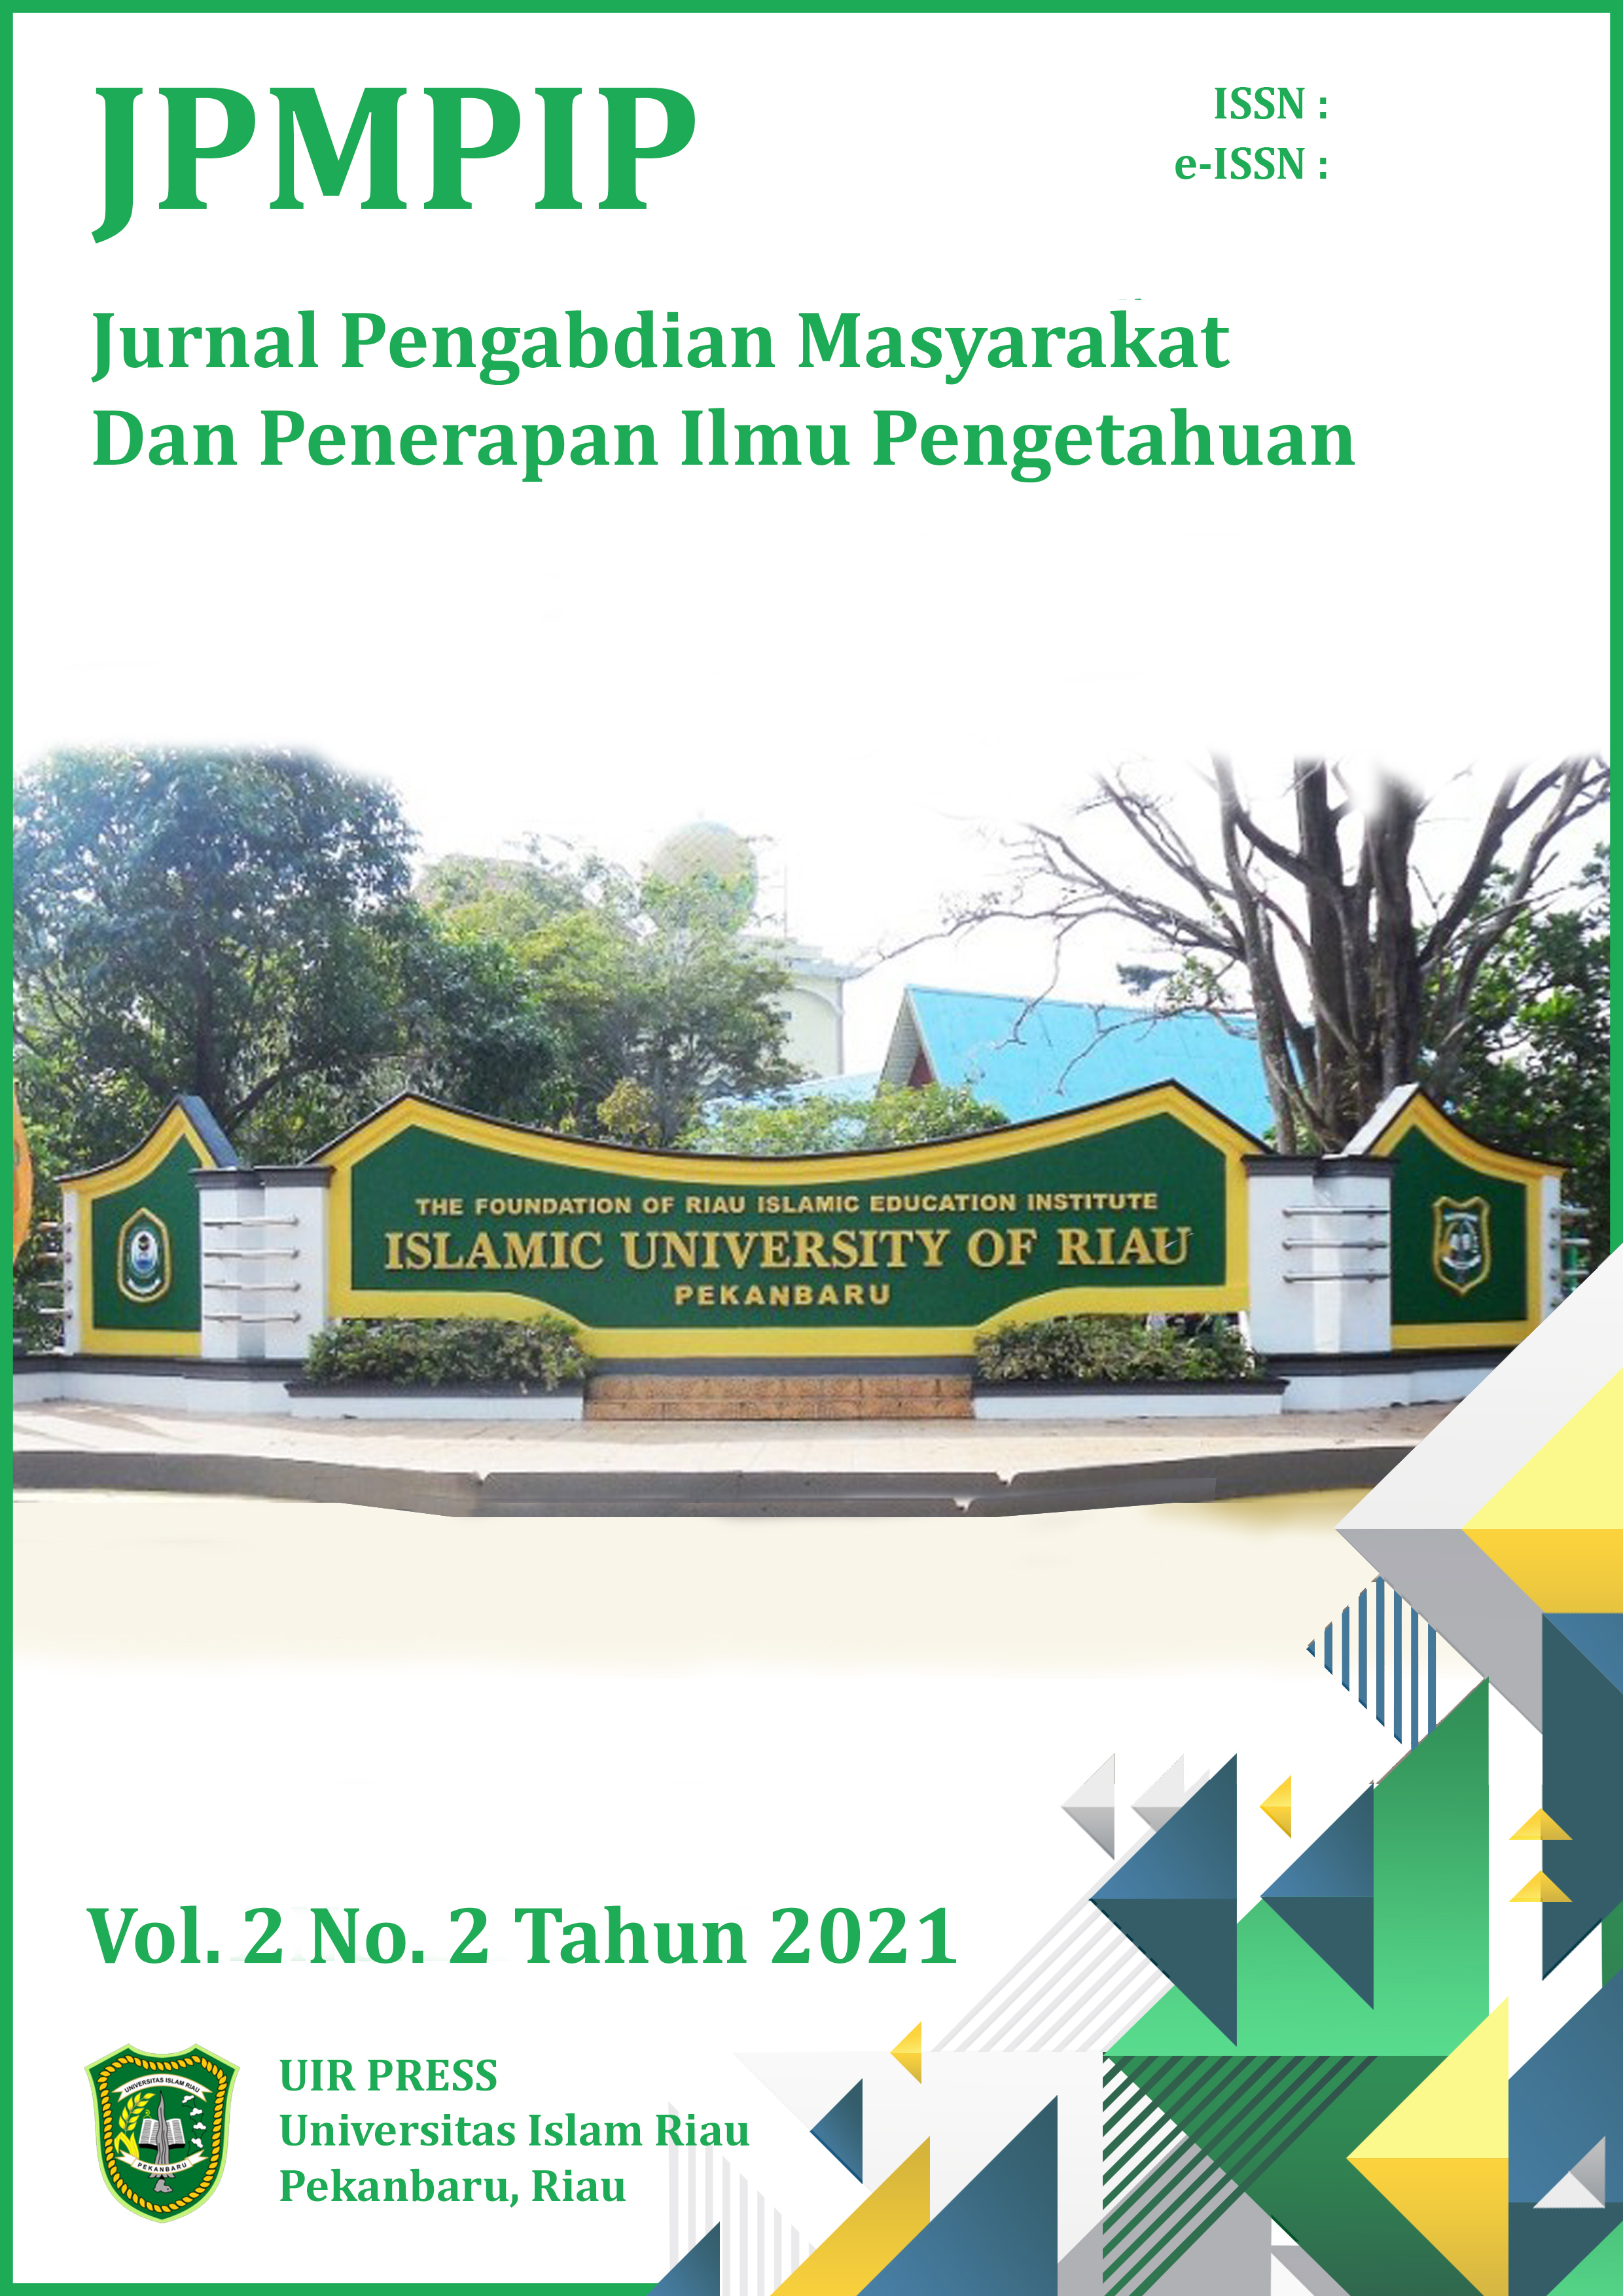 Issue Cover JPMPIP Vol. 2 No. 2 2021